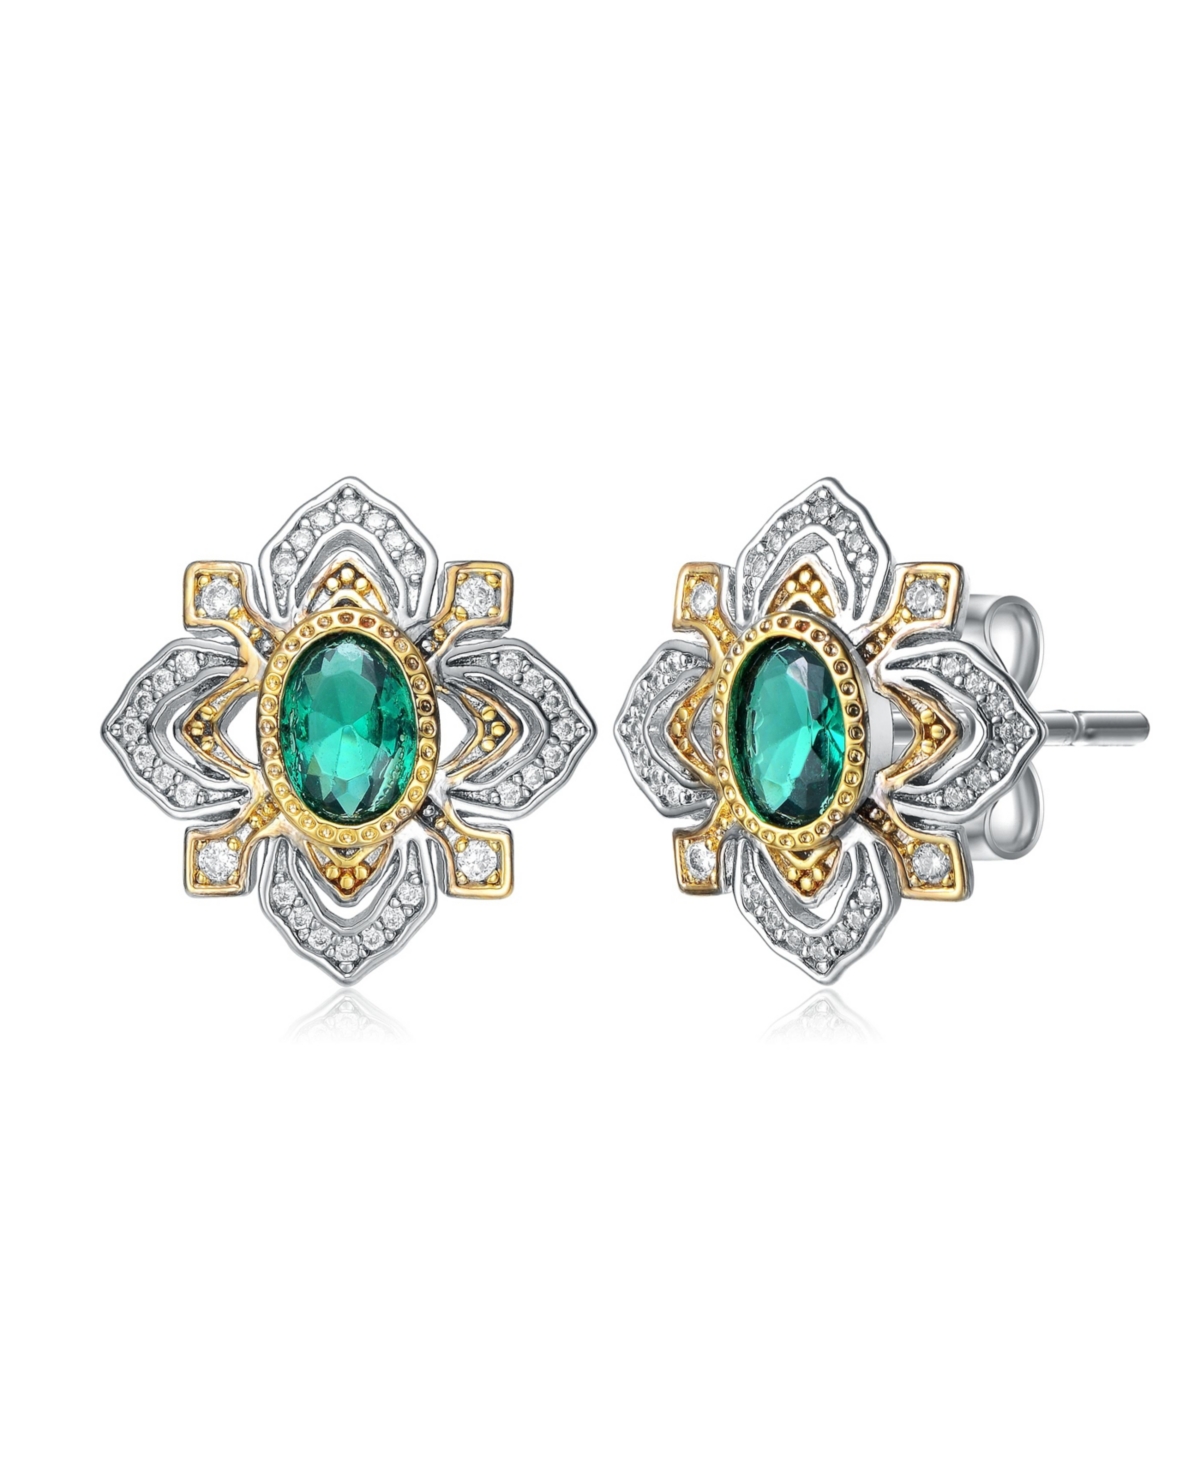 Classy White Gold Plated and 14K Gold Plated with Cubic Zirconia Stud Earrings - Green